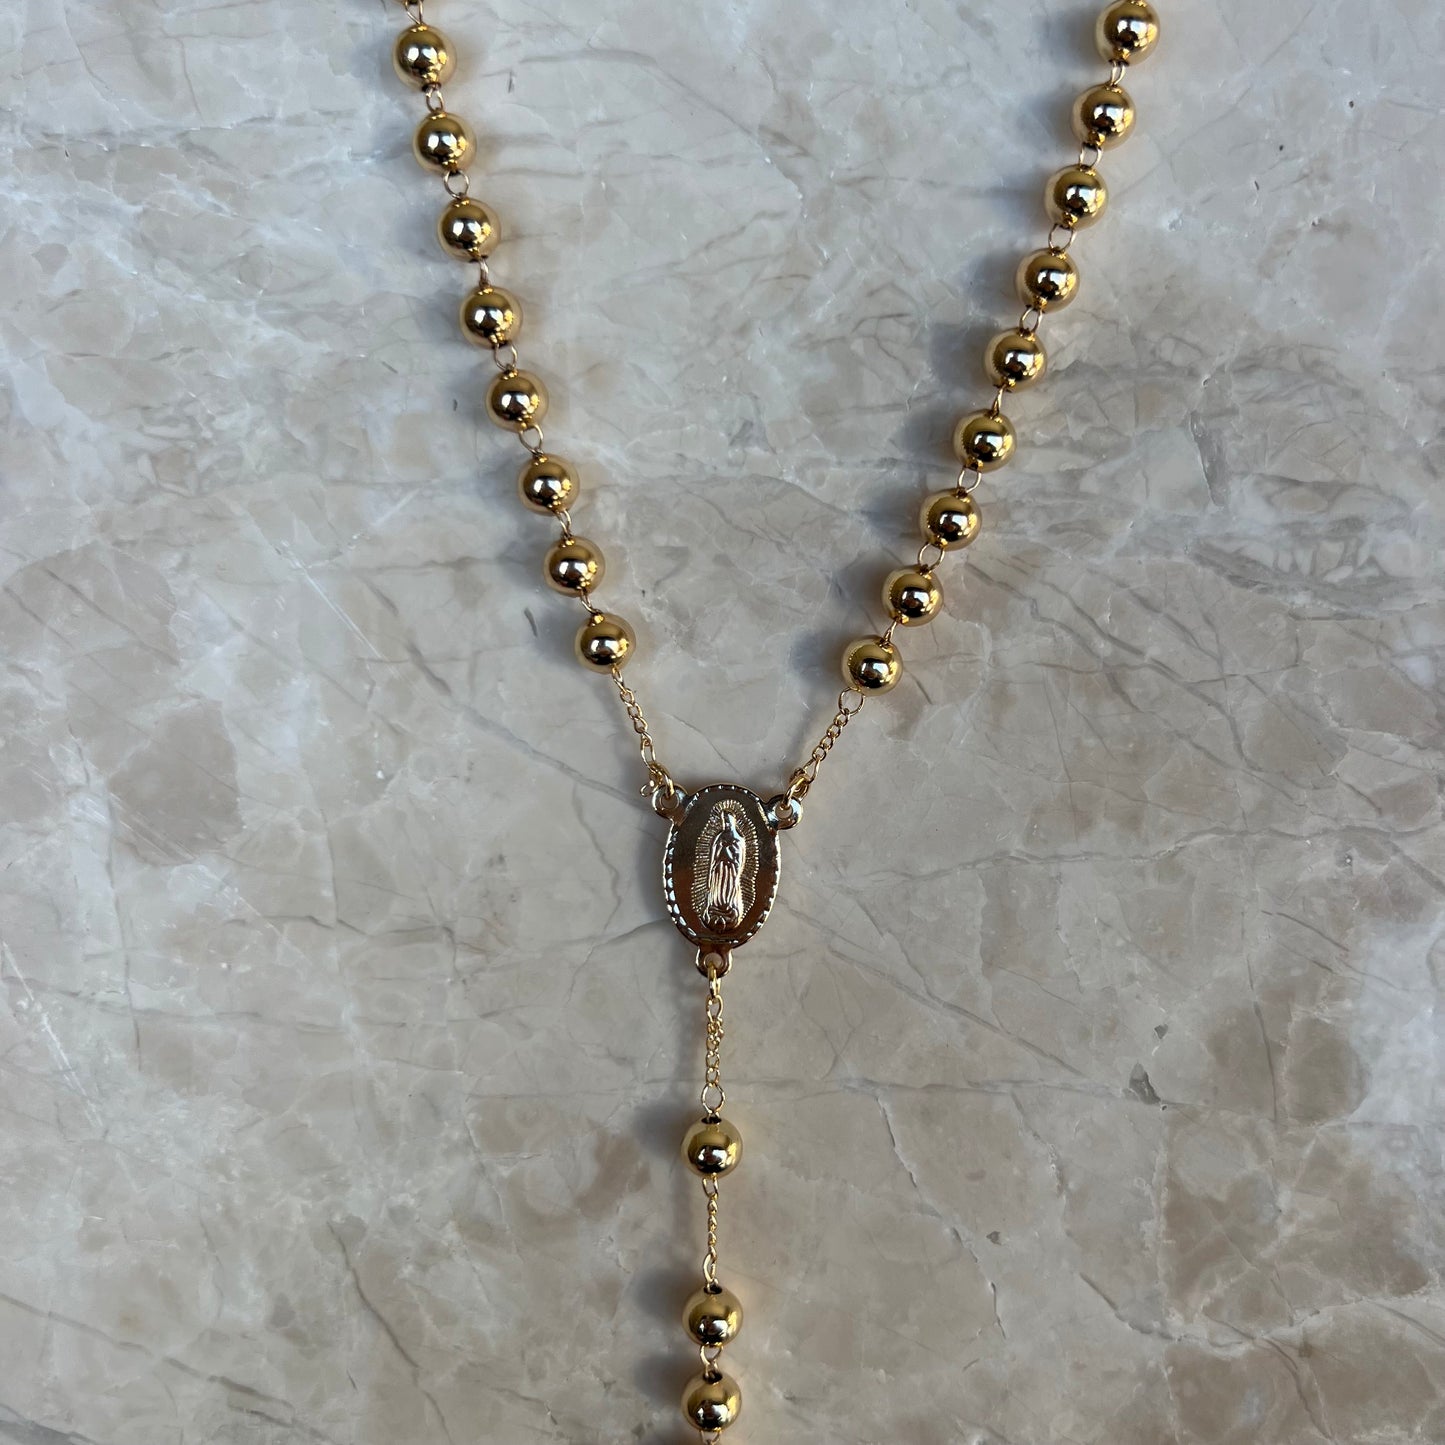 Rosary of our lady necklace